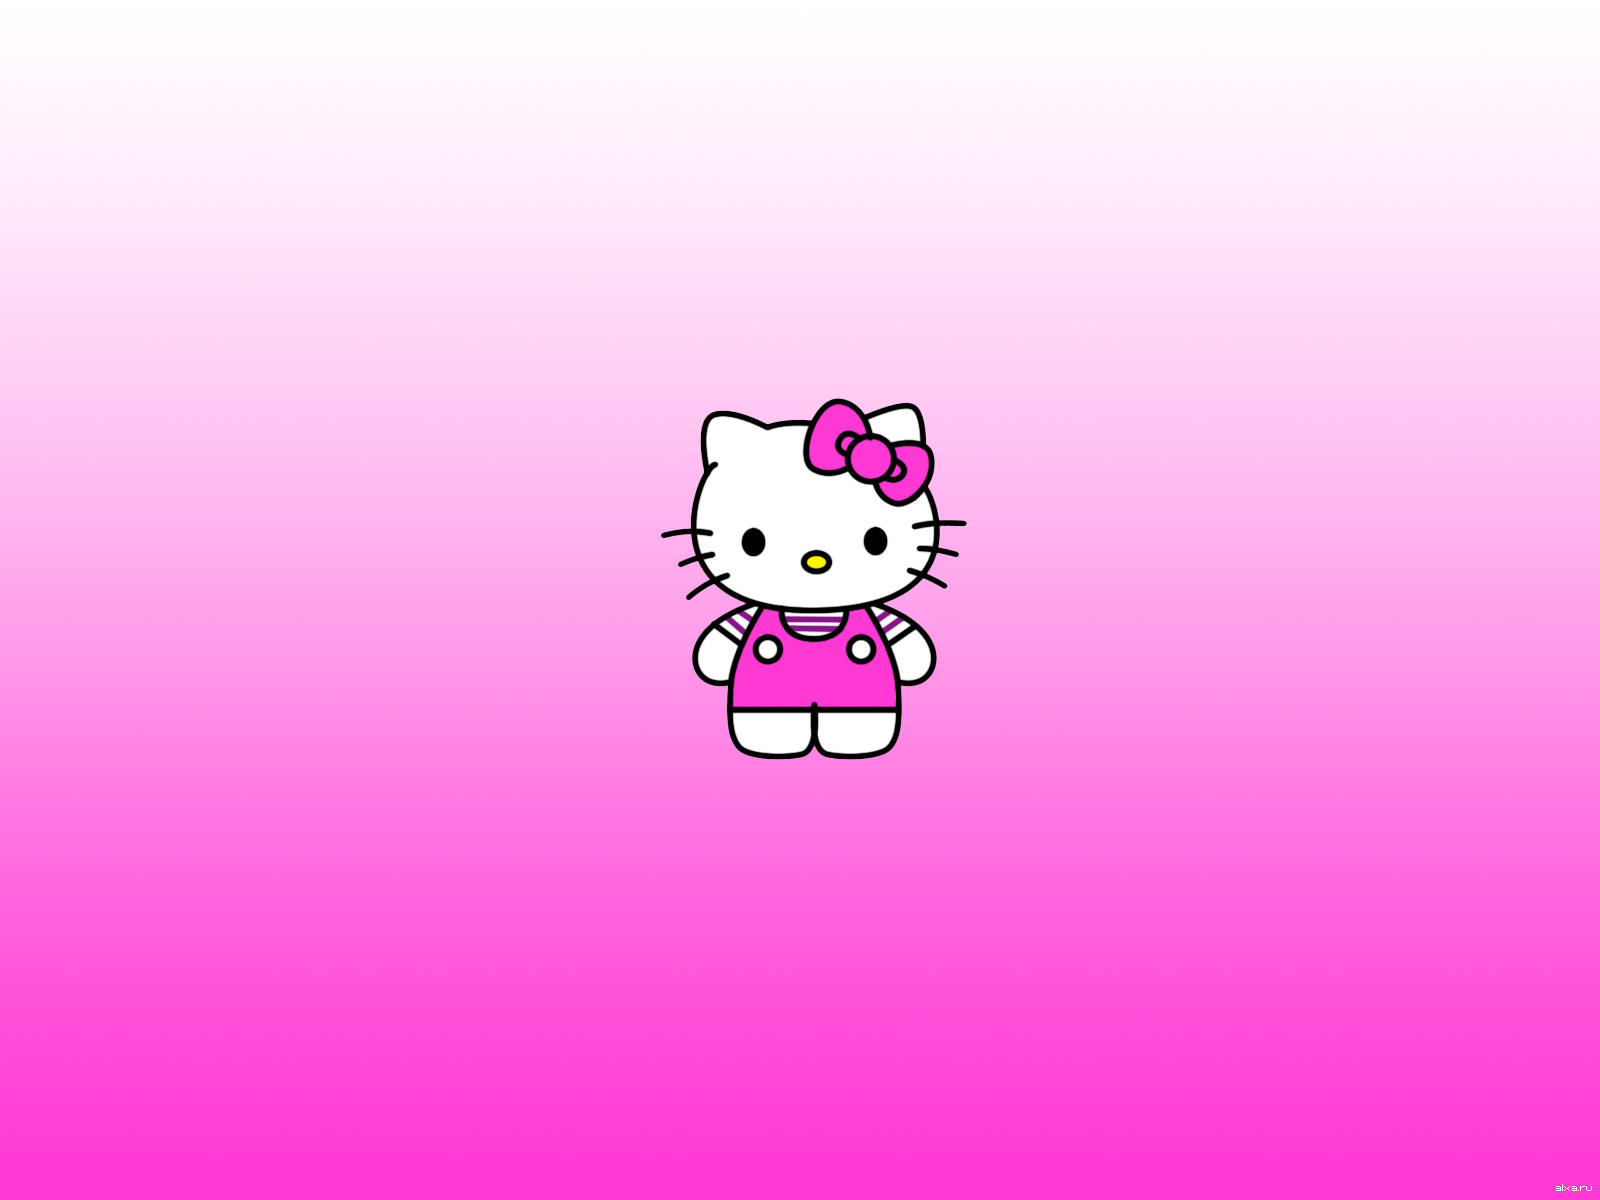 Download Wallpaper Hello Kitty 3d Image Num 56